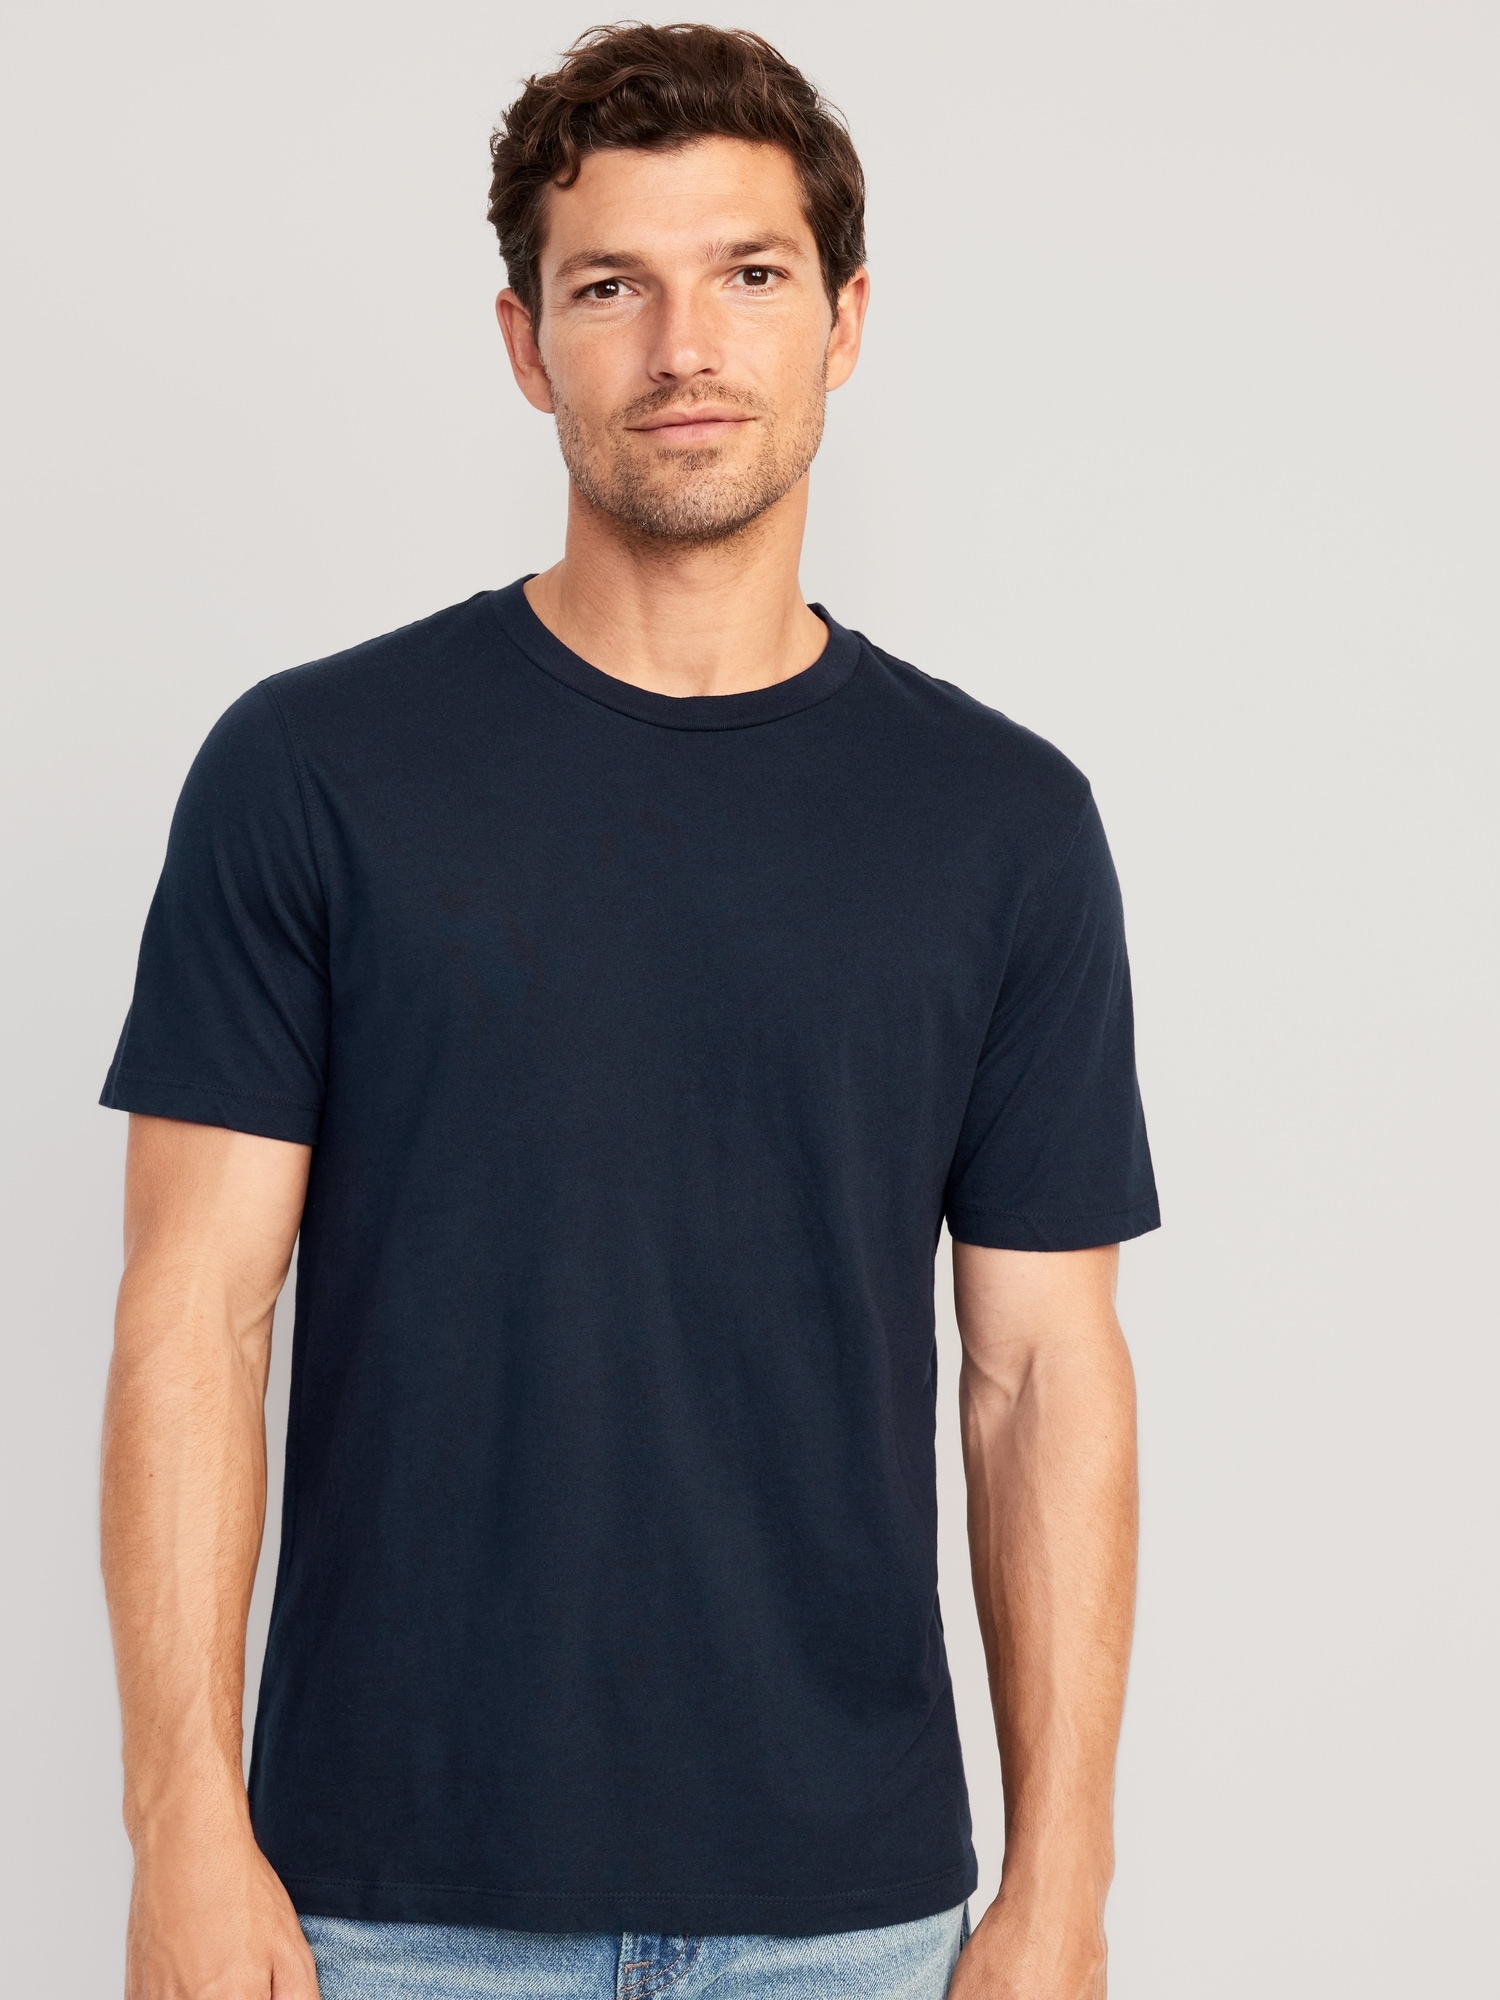 Soft Washed Crew Neck T Shirt For Men Old Navy 1513